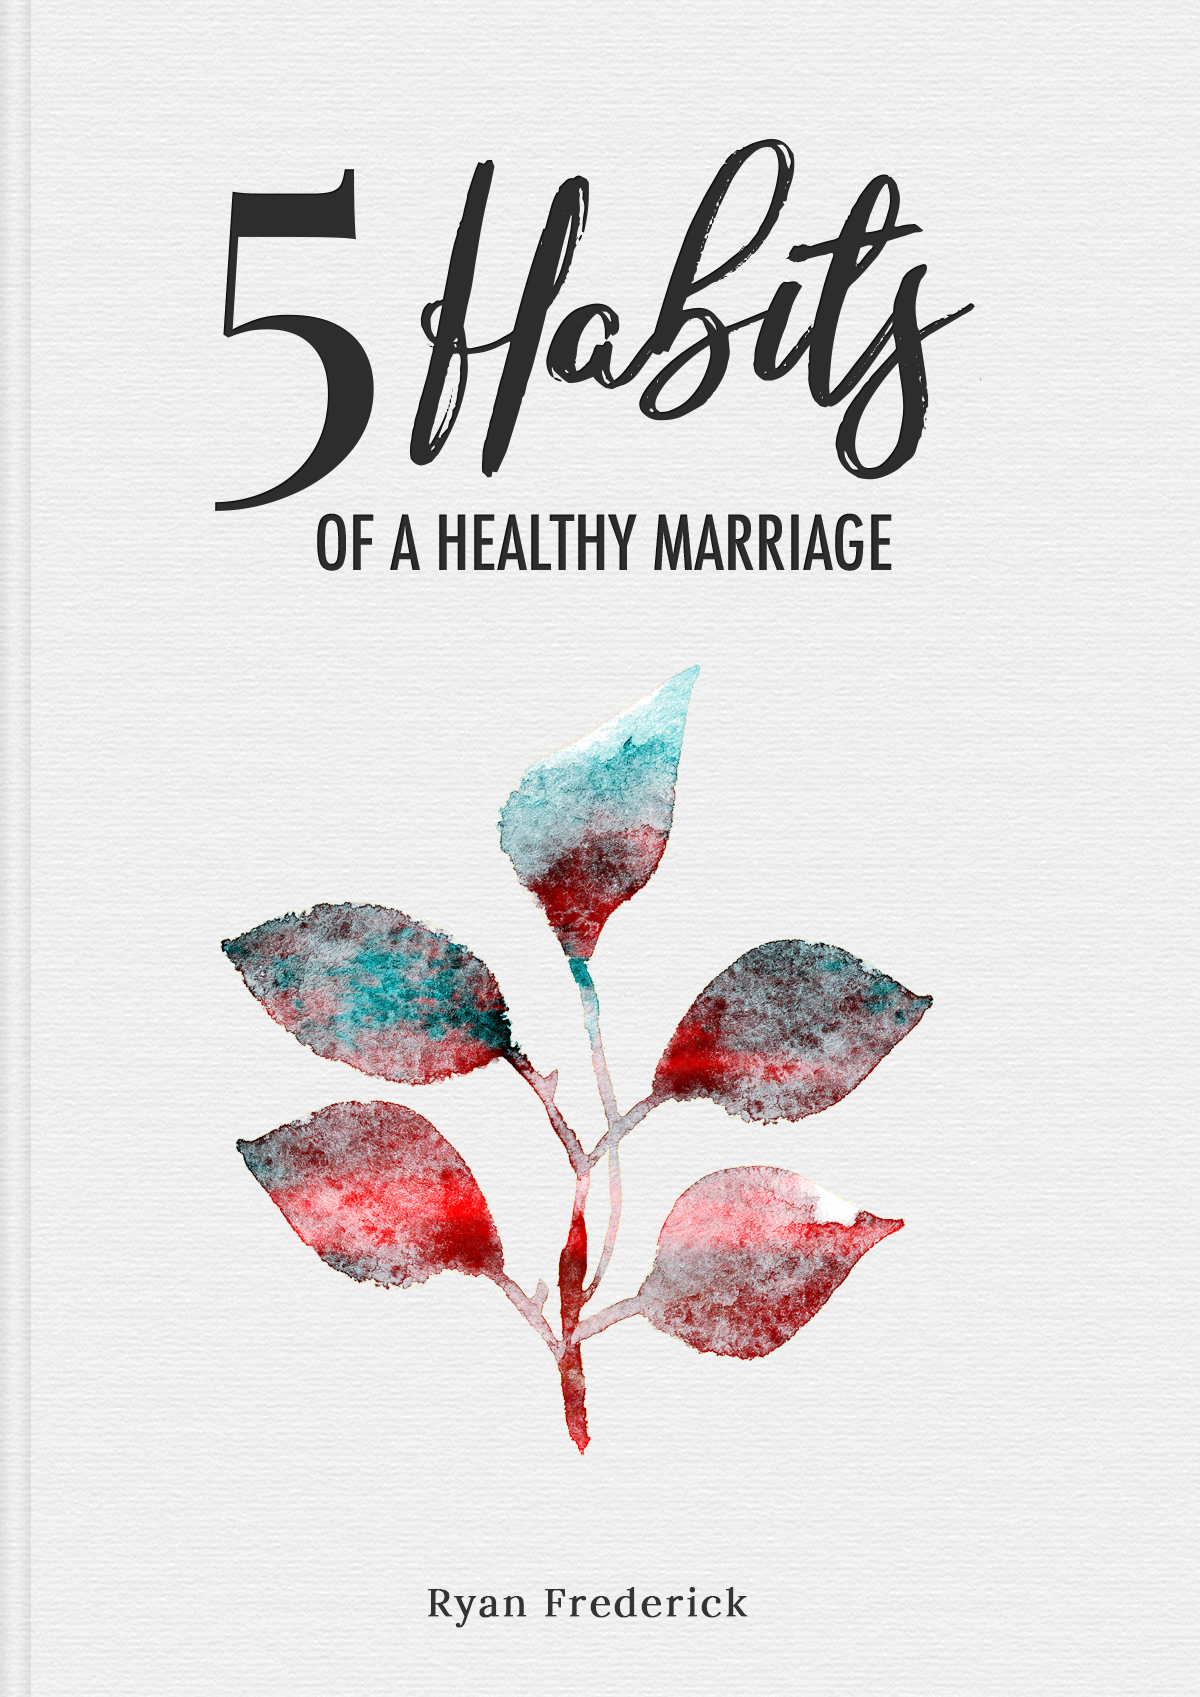 5 Habits of a Healthy Marriage book cover